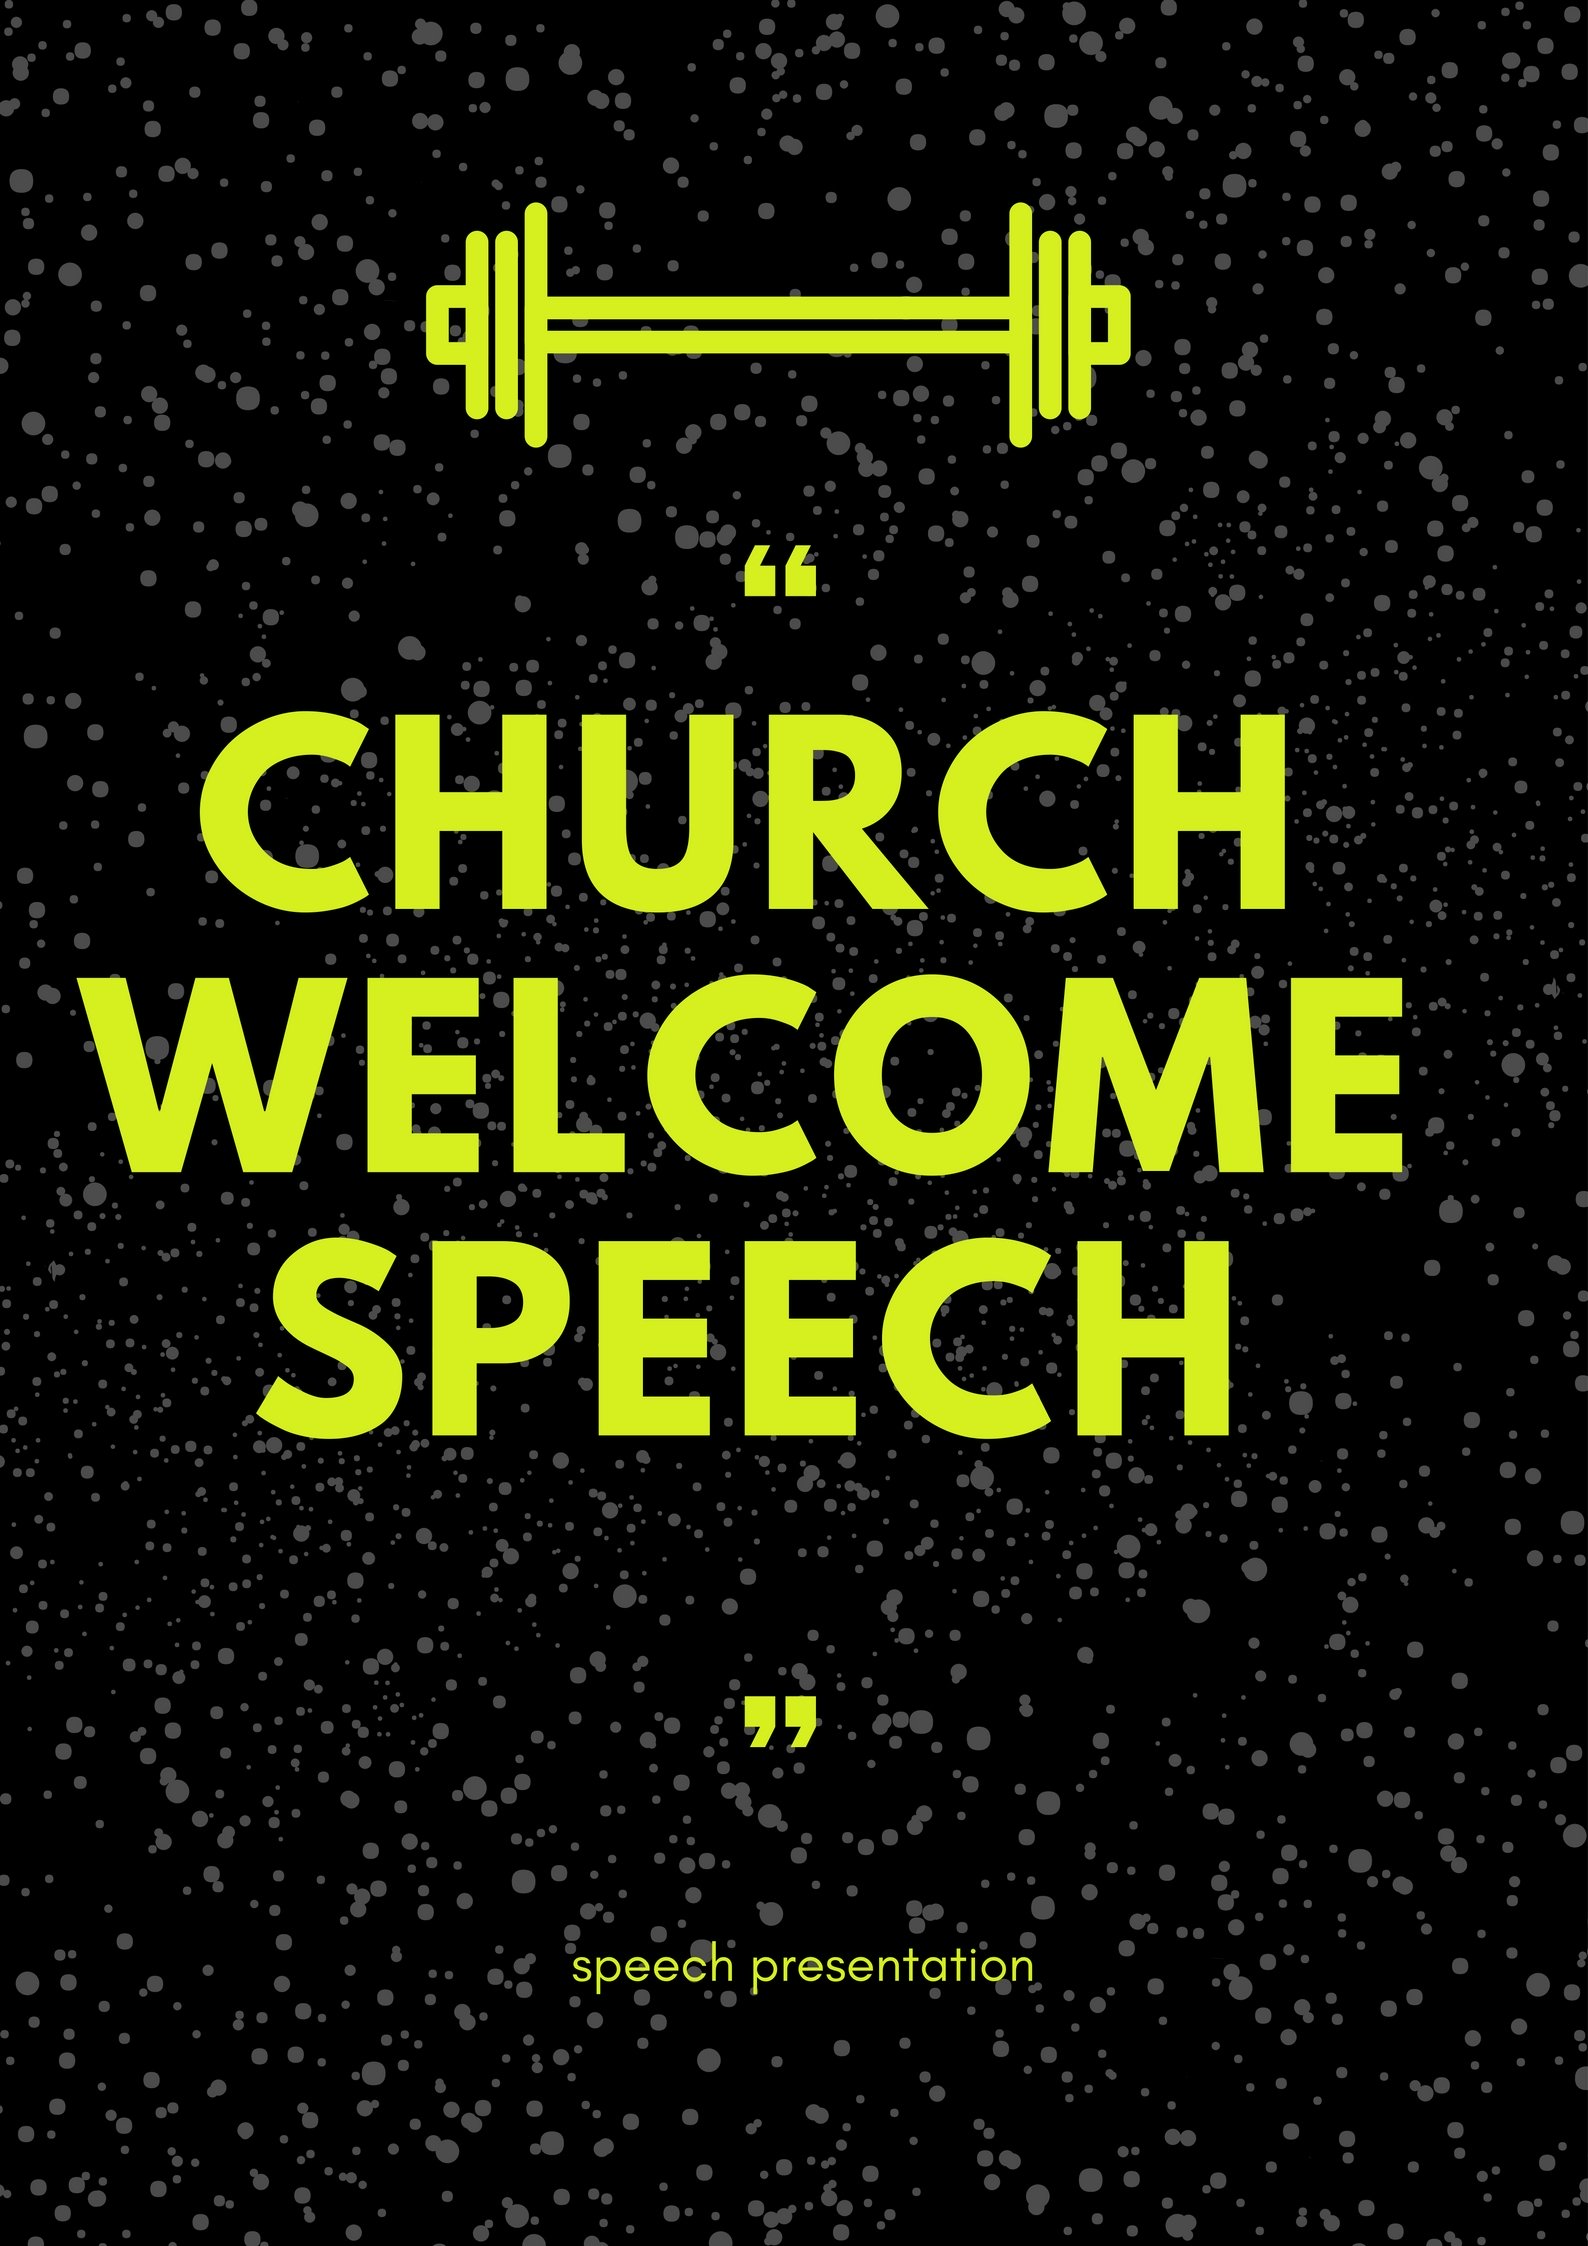 Looking for a speech about opening a new pentecostal church? Visit our page and get a guide on how to go about it.